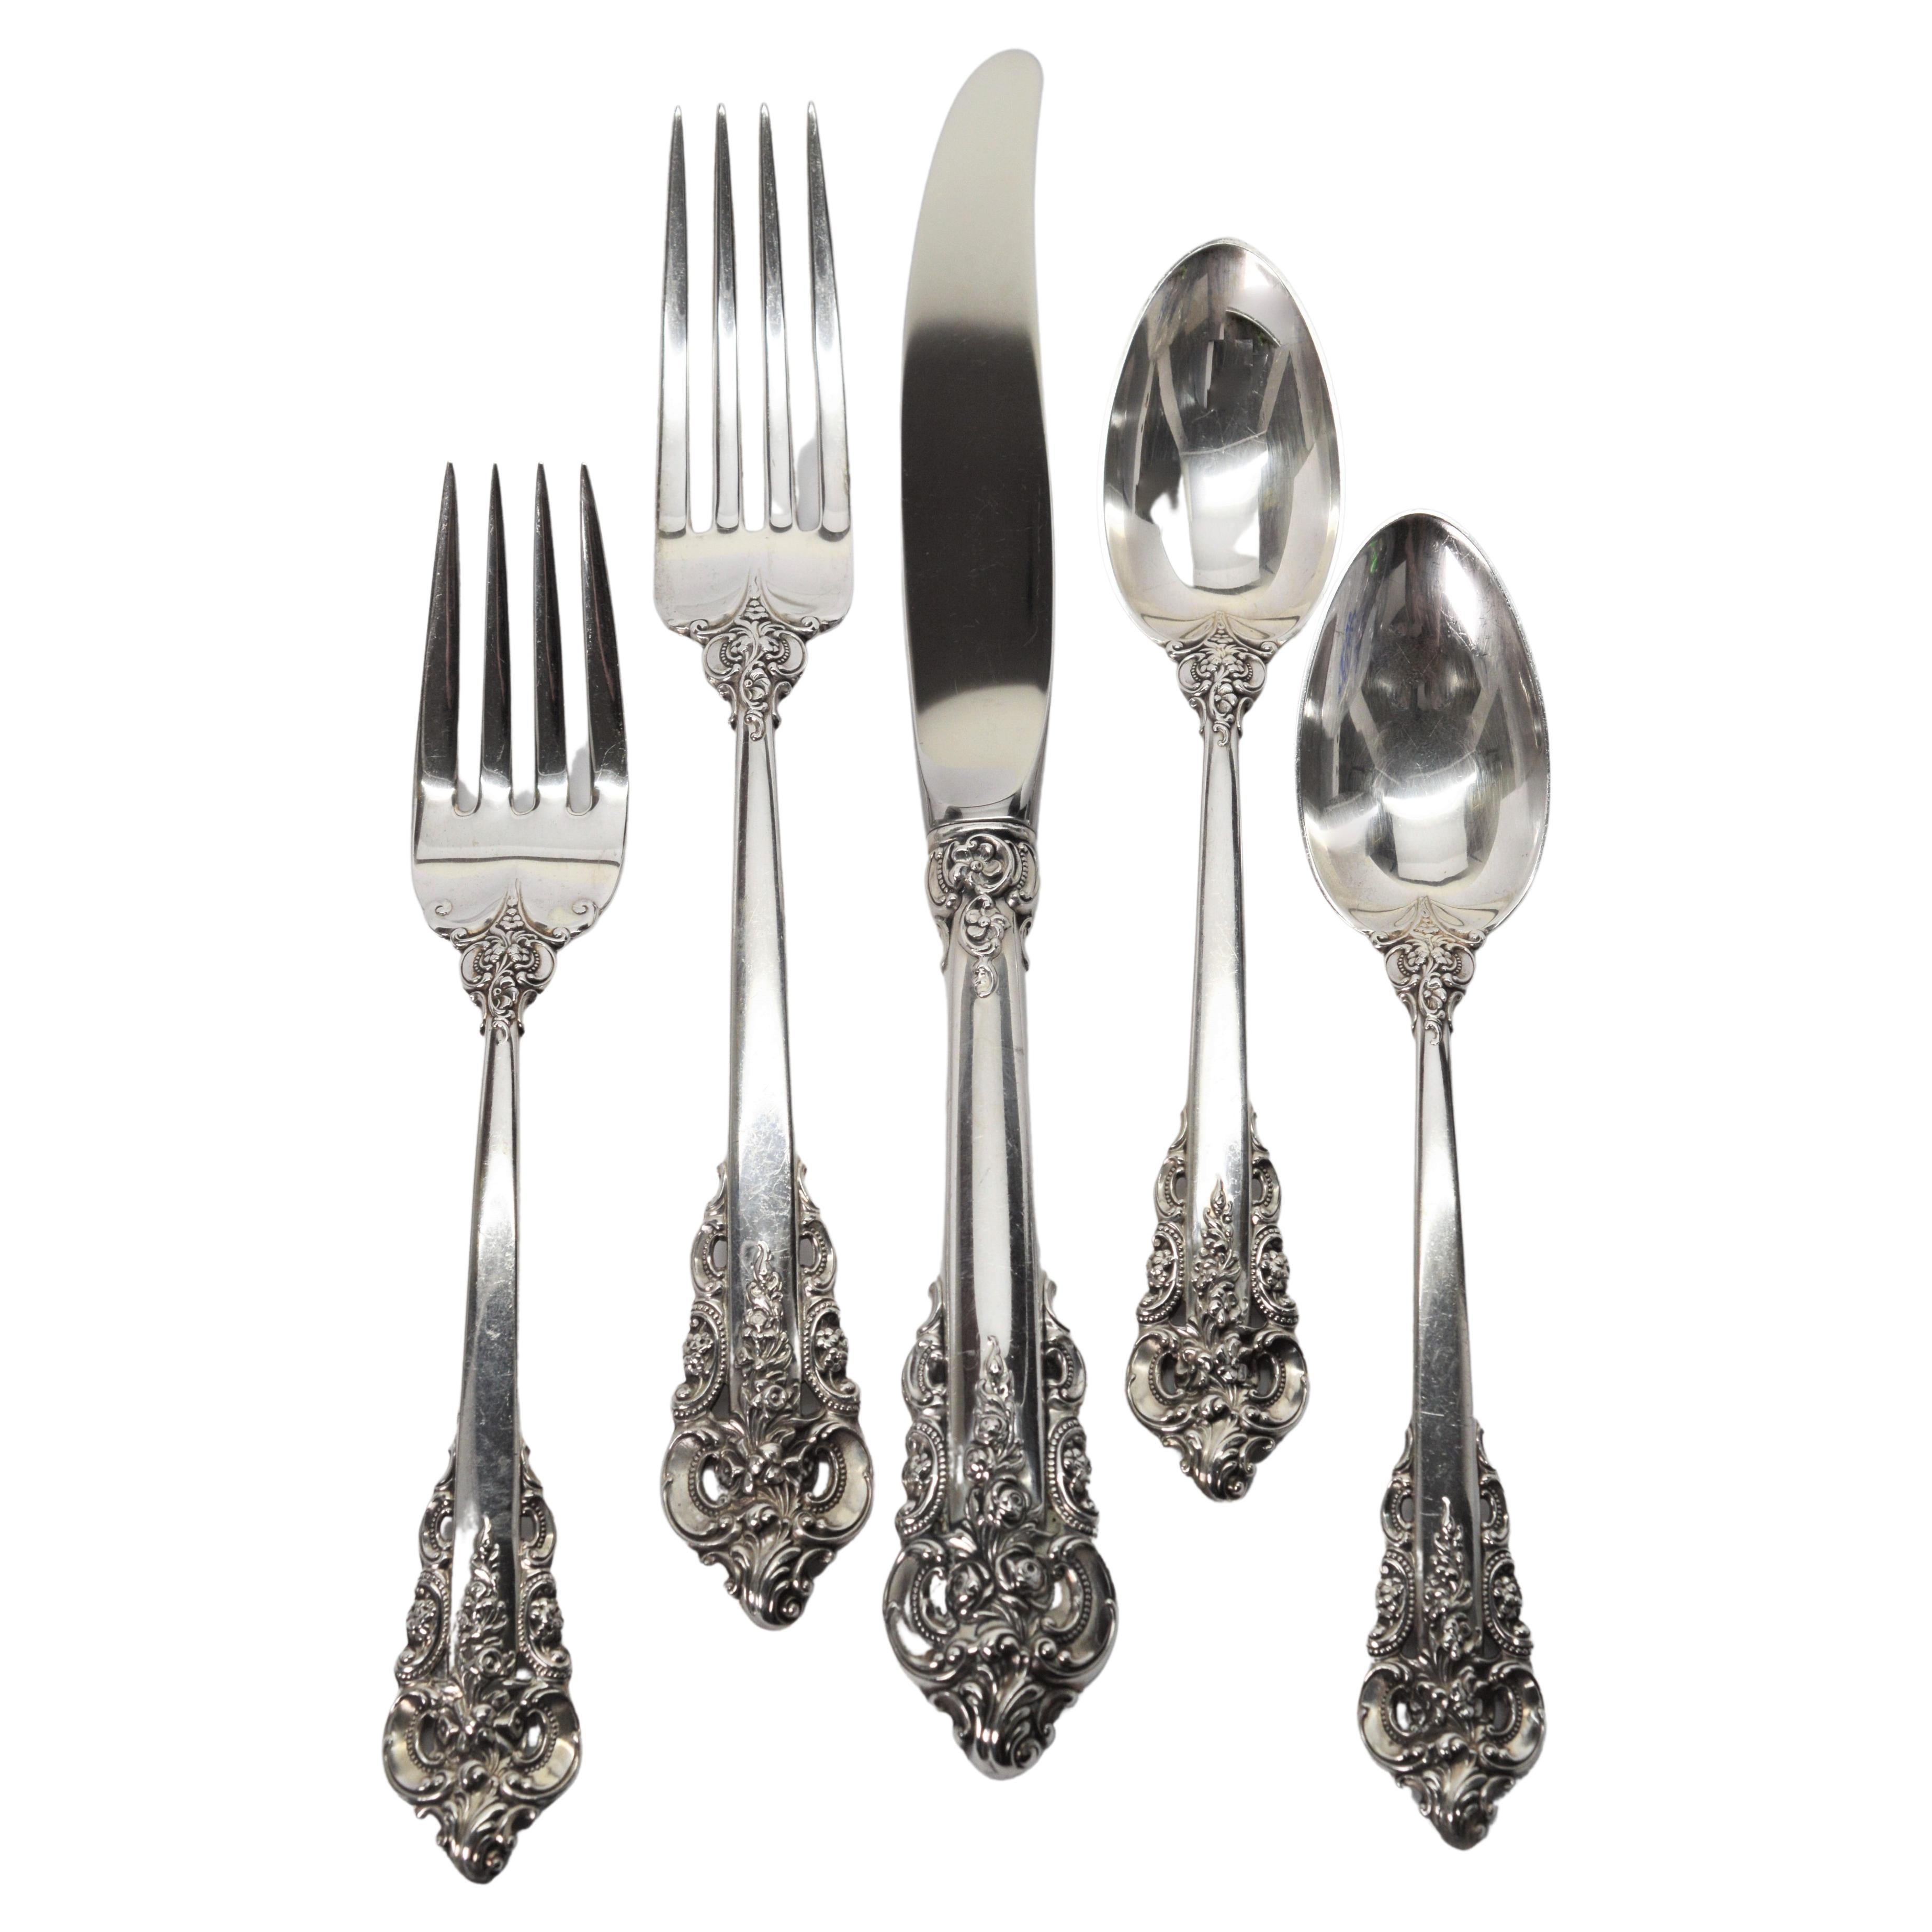 Wallace Grand Baroque Sterling Silver Flatware, Five Piece Place Setting